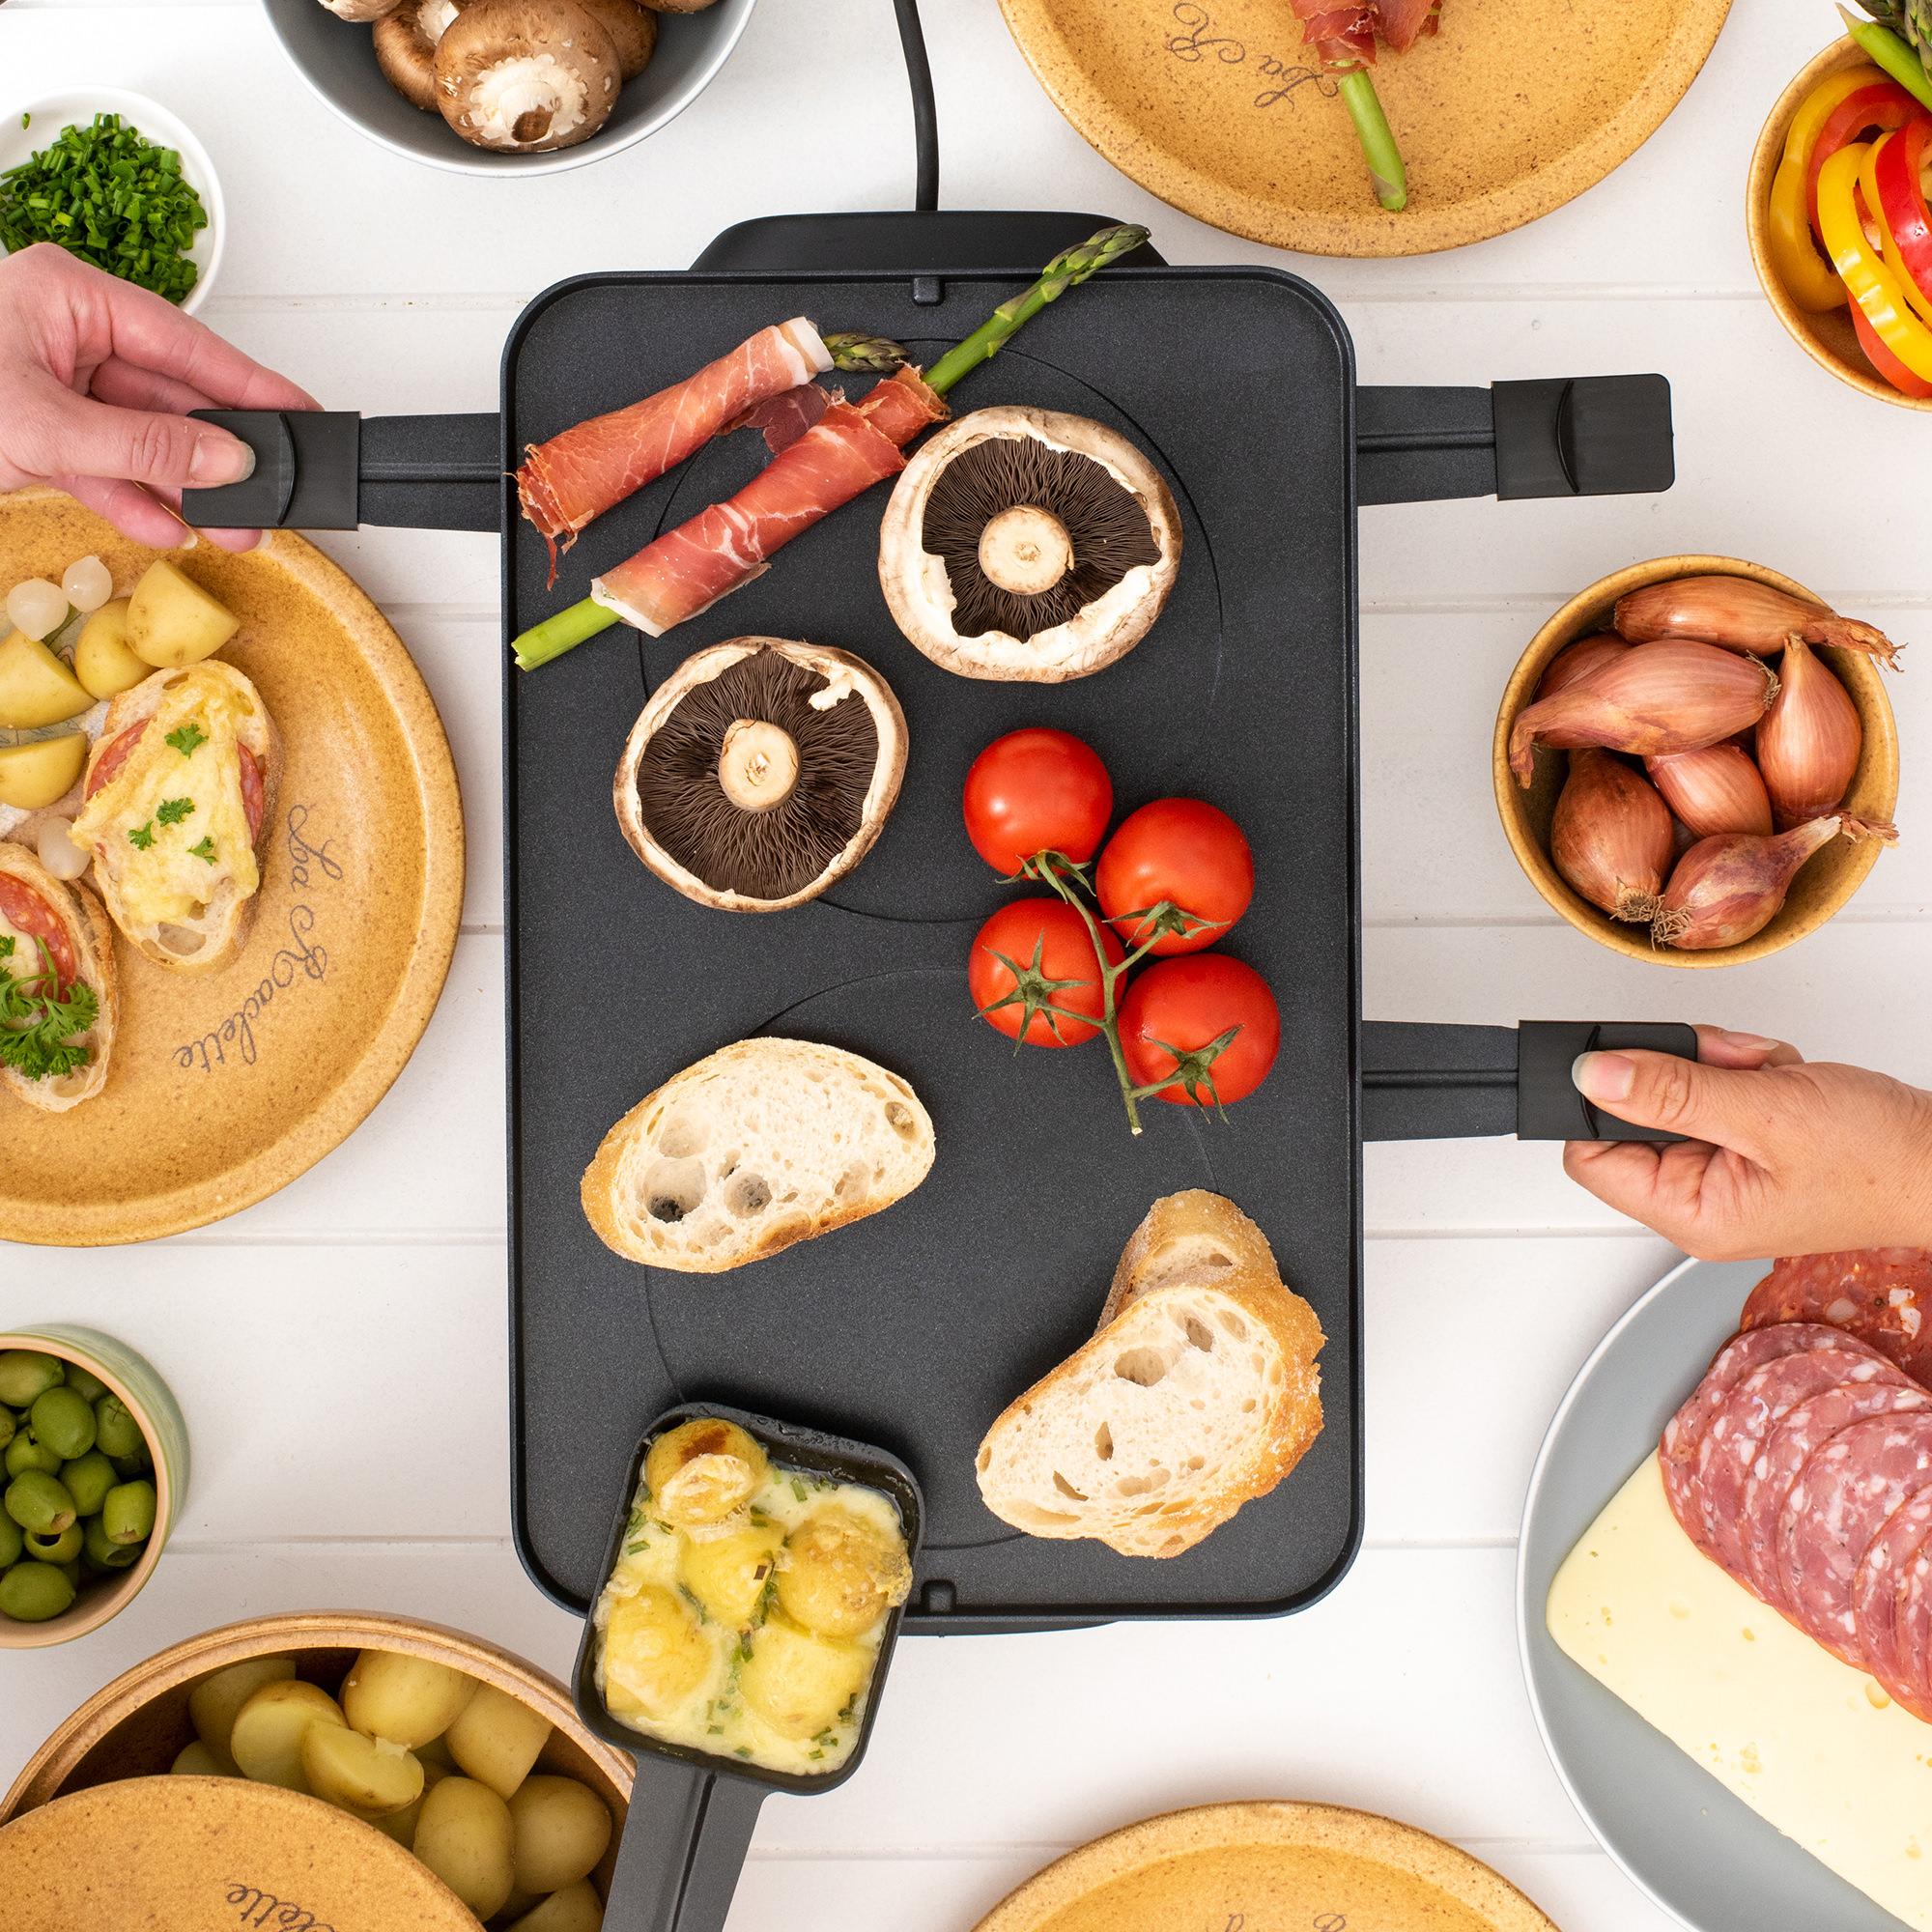 Swissmar Valais 8 Person Raclette Party Grill Stainless Steel Image 6